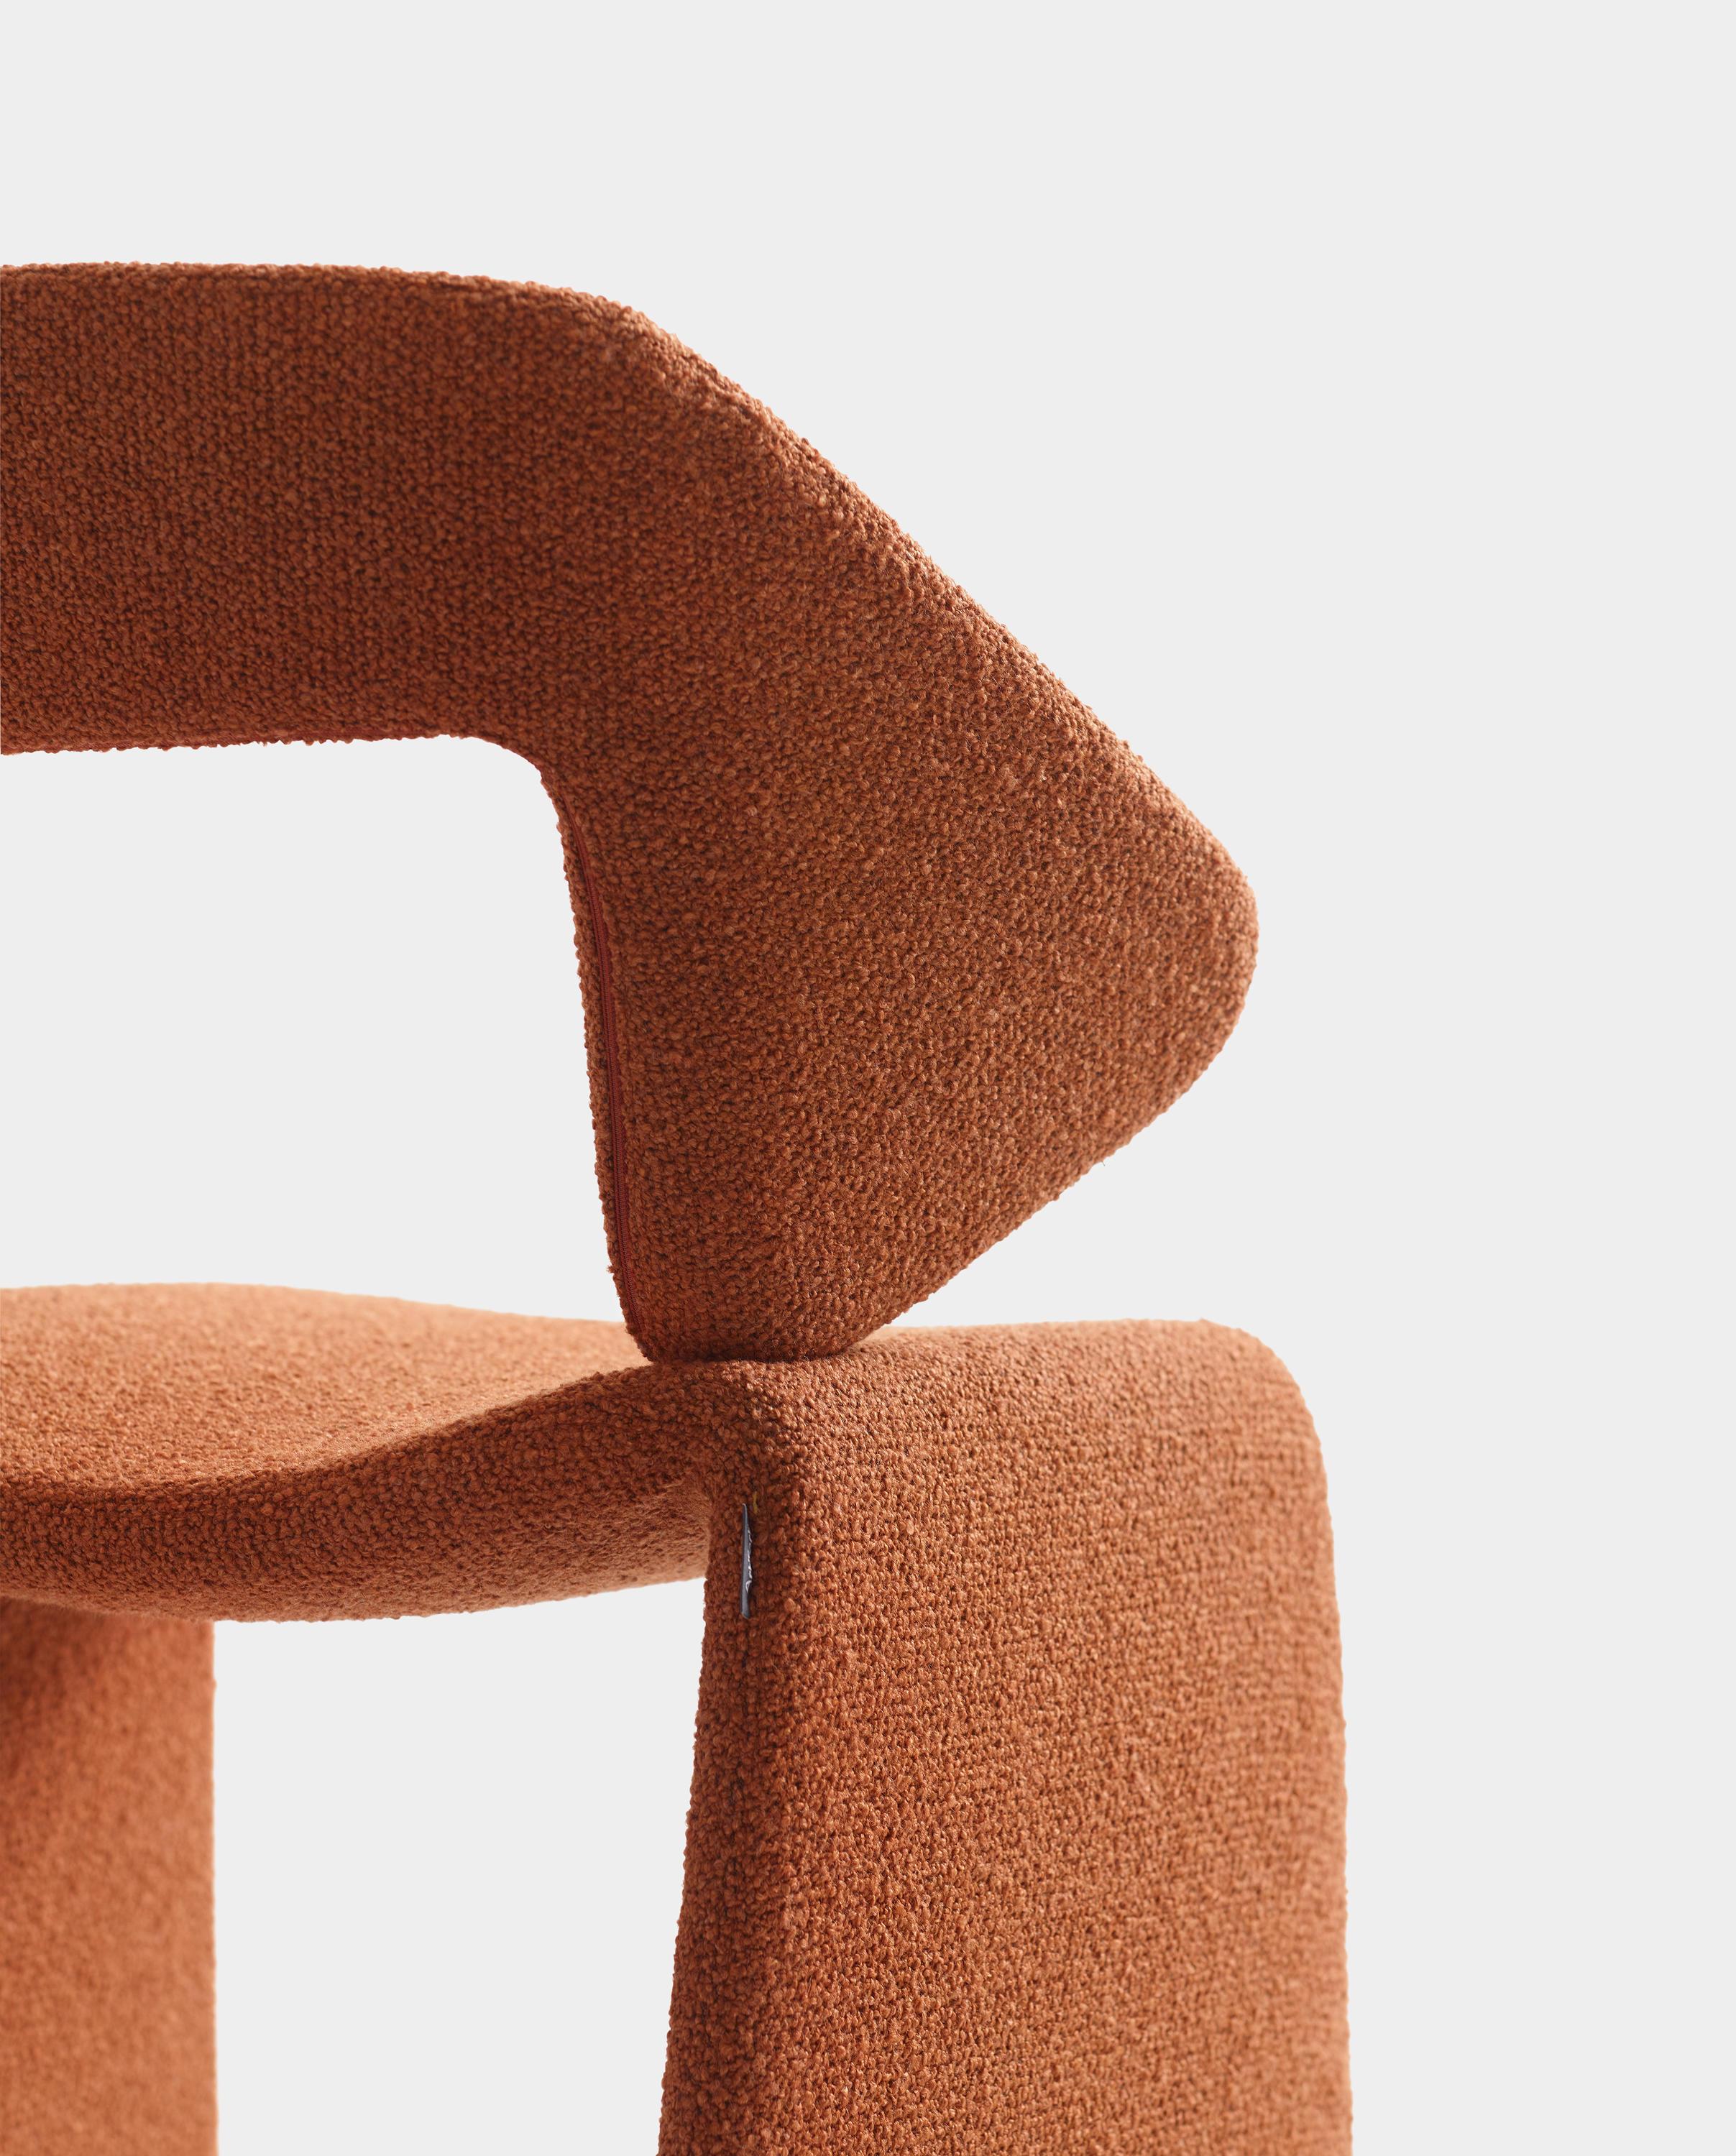 There’s nothing better than making a good first impression that combines professional elegance with an individual personality. With the fully upholstered Suit chair, Monica Förster introduces a new standard of seating comfort for restaurants,